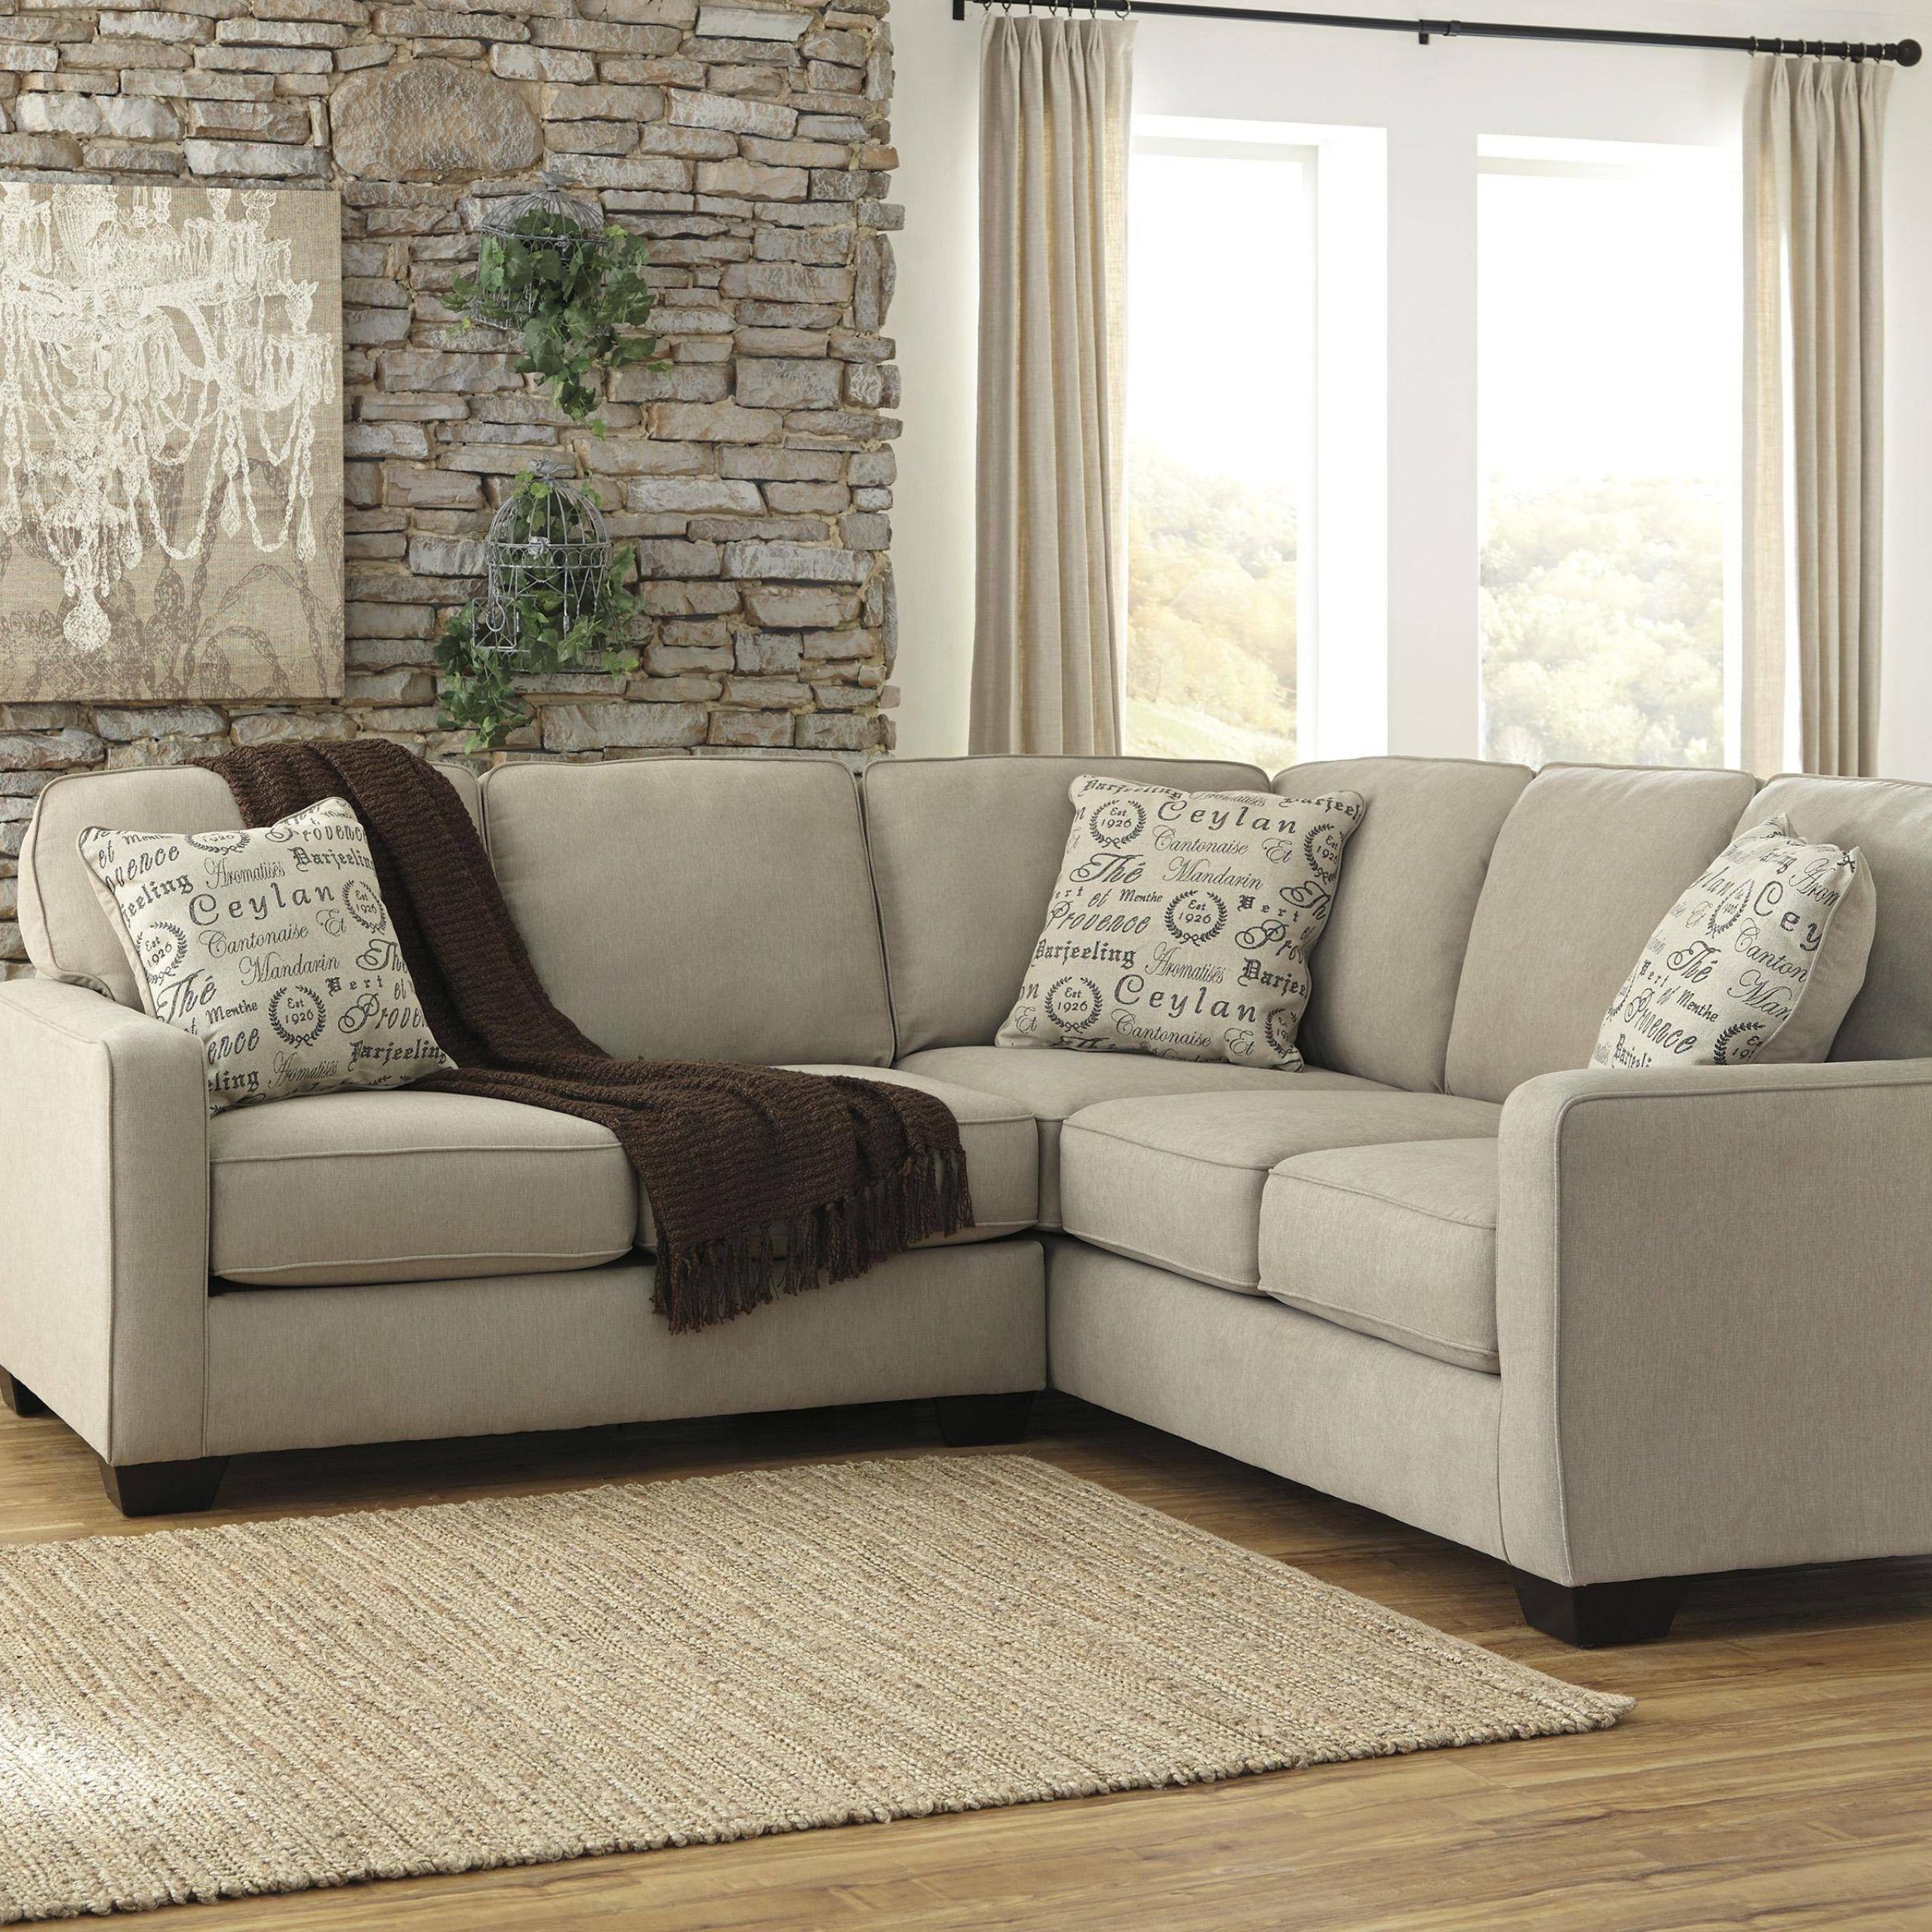 Buy Ashley Alenya Sectional Sofa Left Hand Chase In Quartz, Linen Online With Regard To Small L Shaped Sectional Sofas In Beige (Gallery 18 of 21)